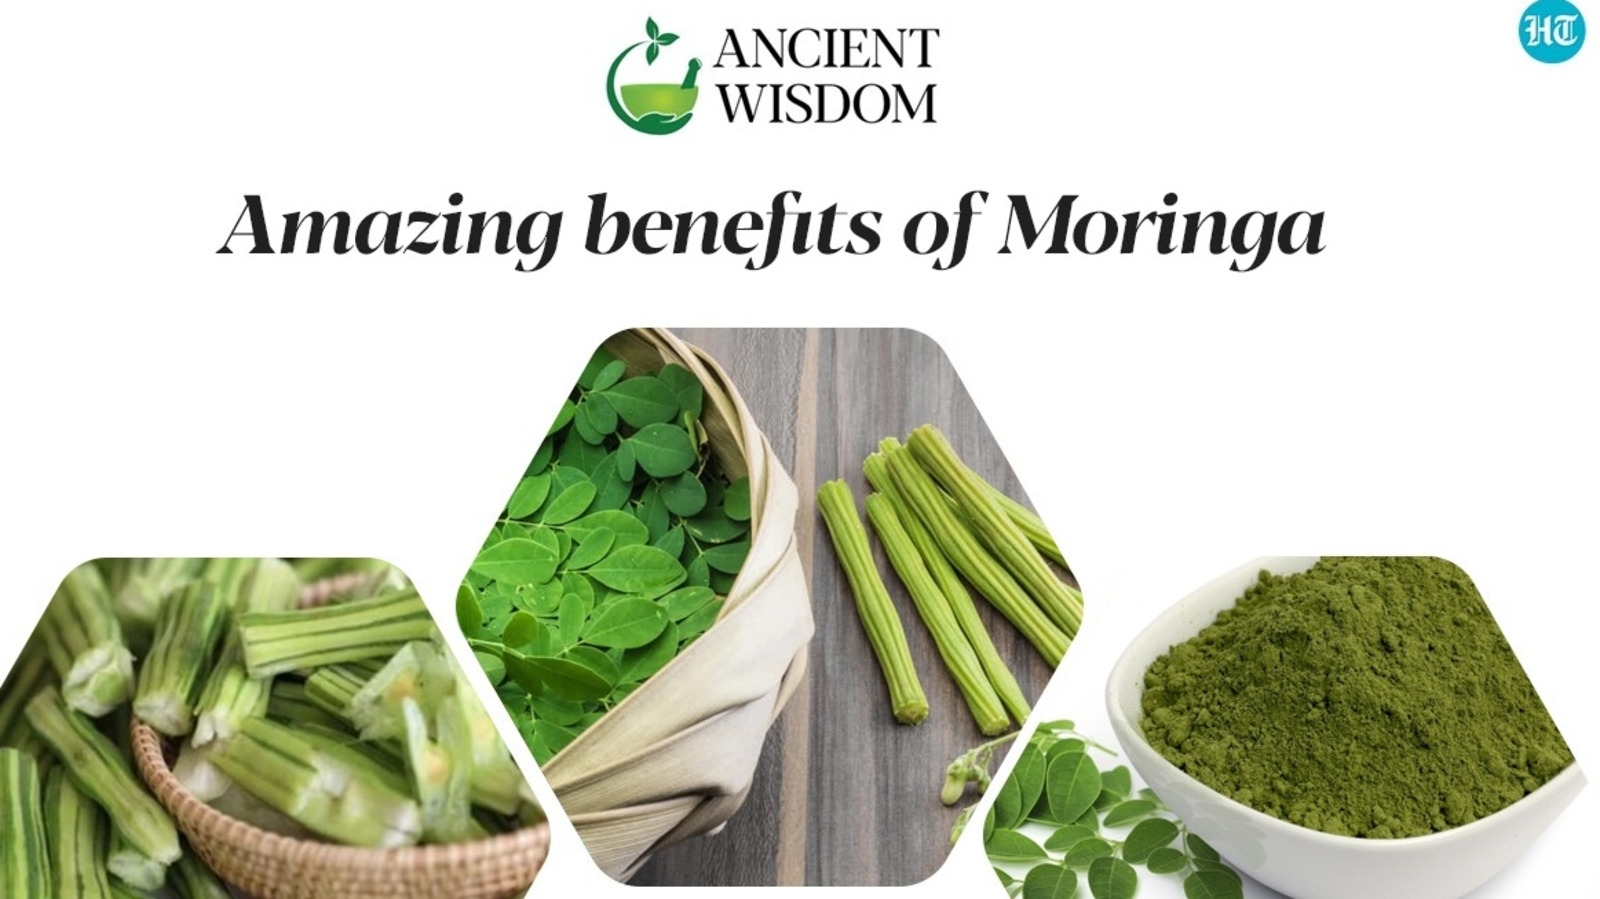 Moringa can help you live longer, control diabetes; know all benefits | Health